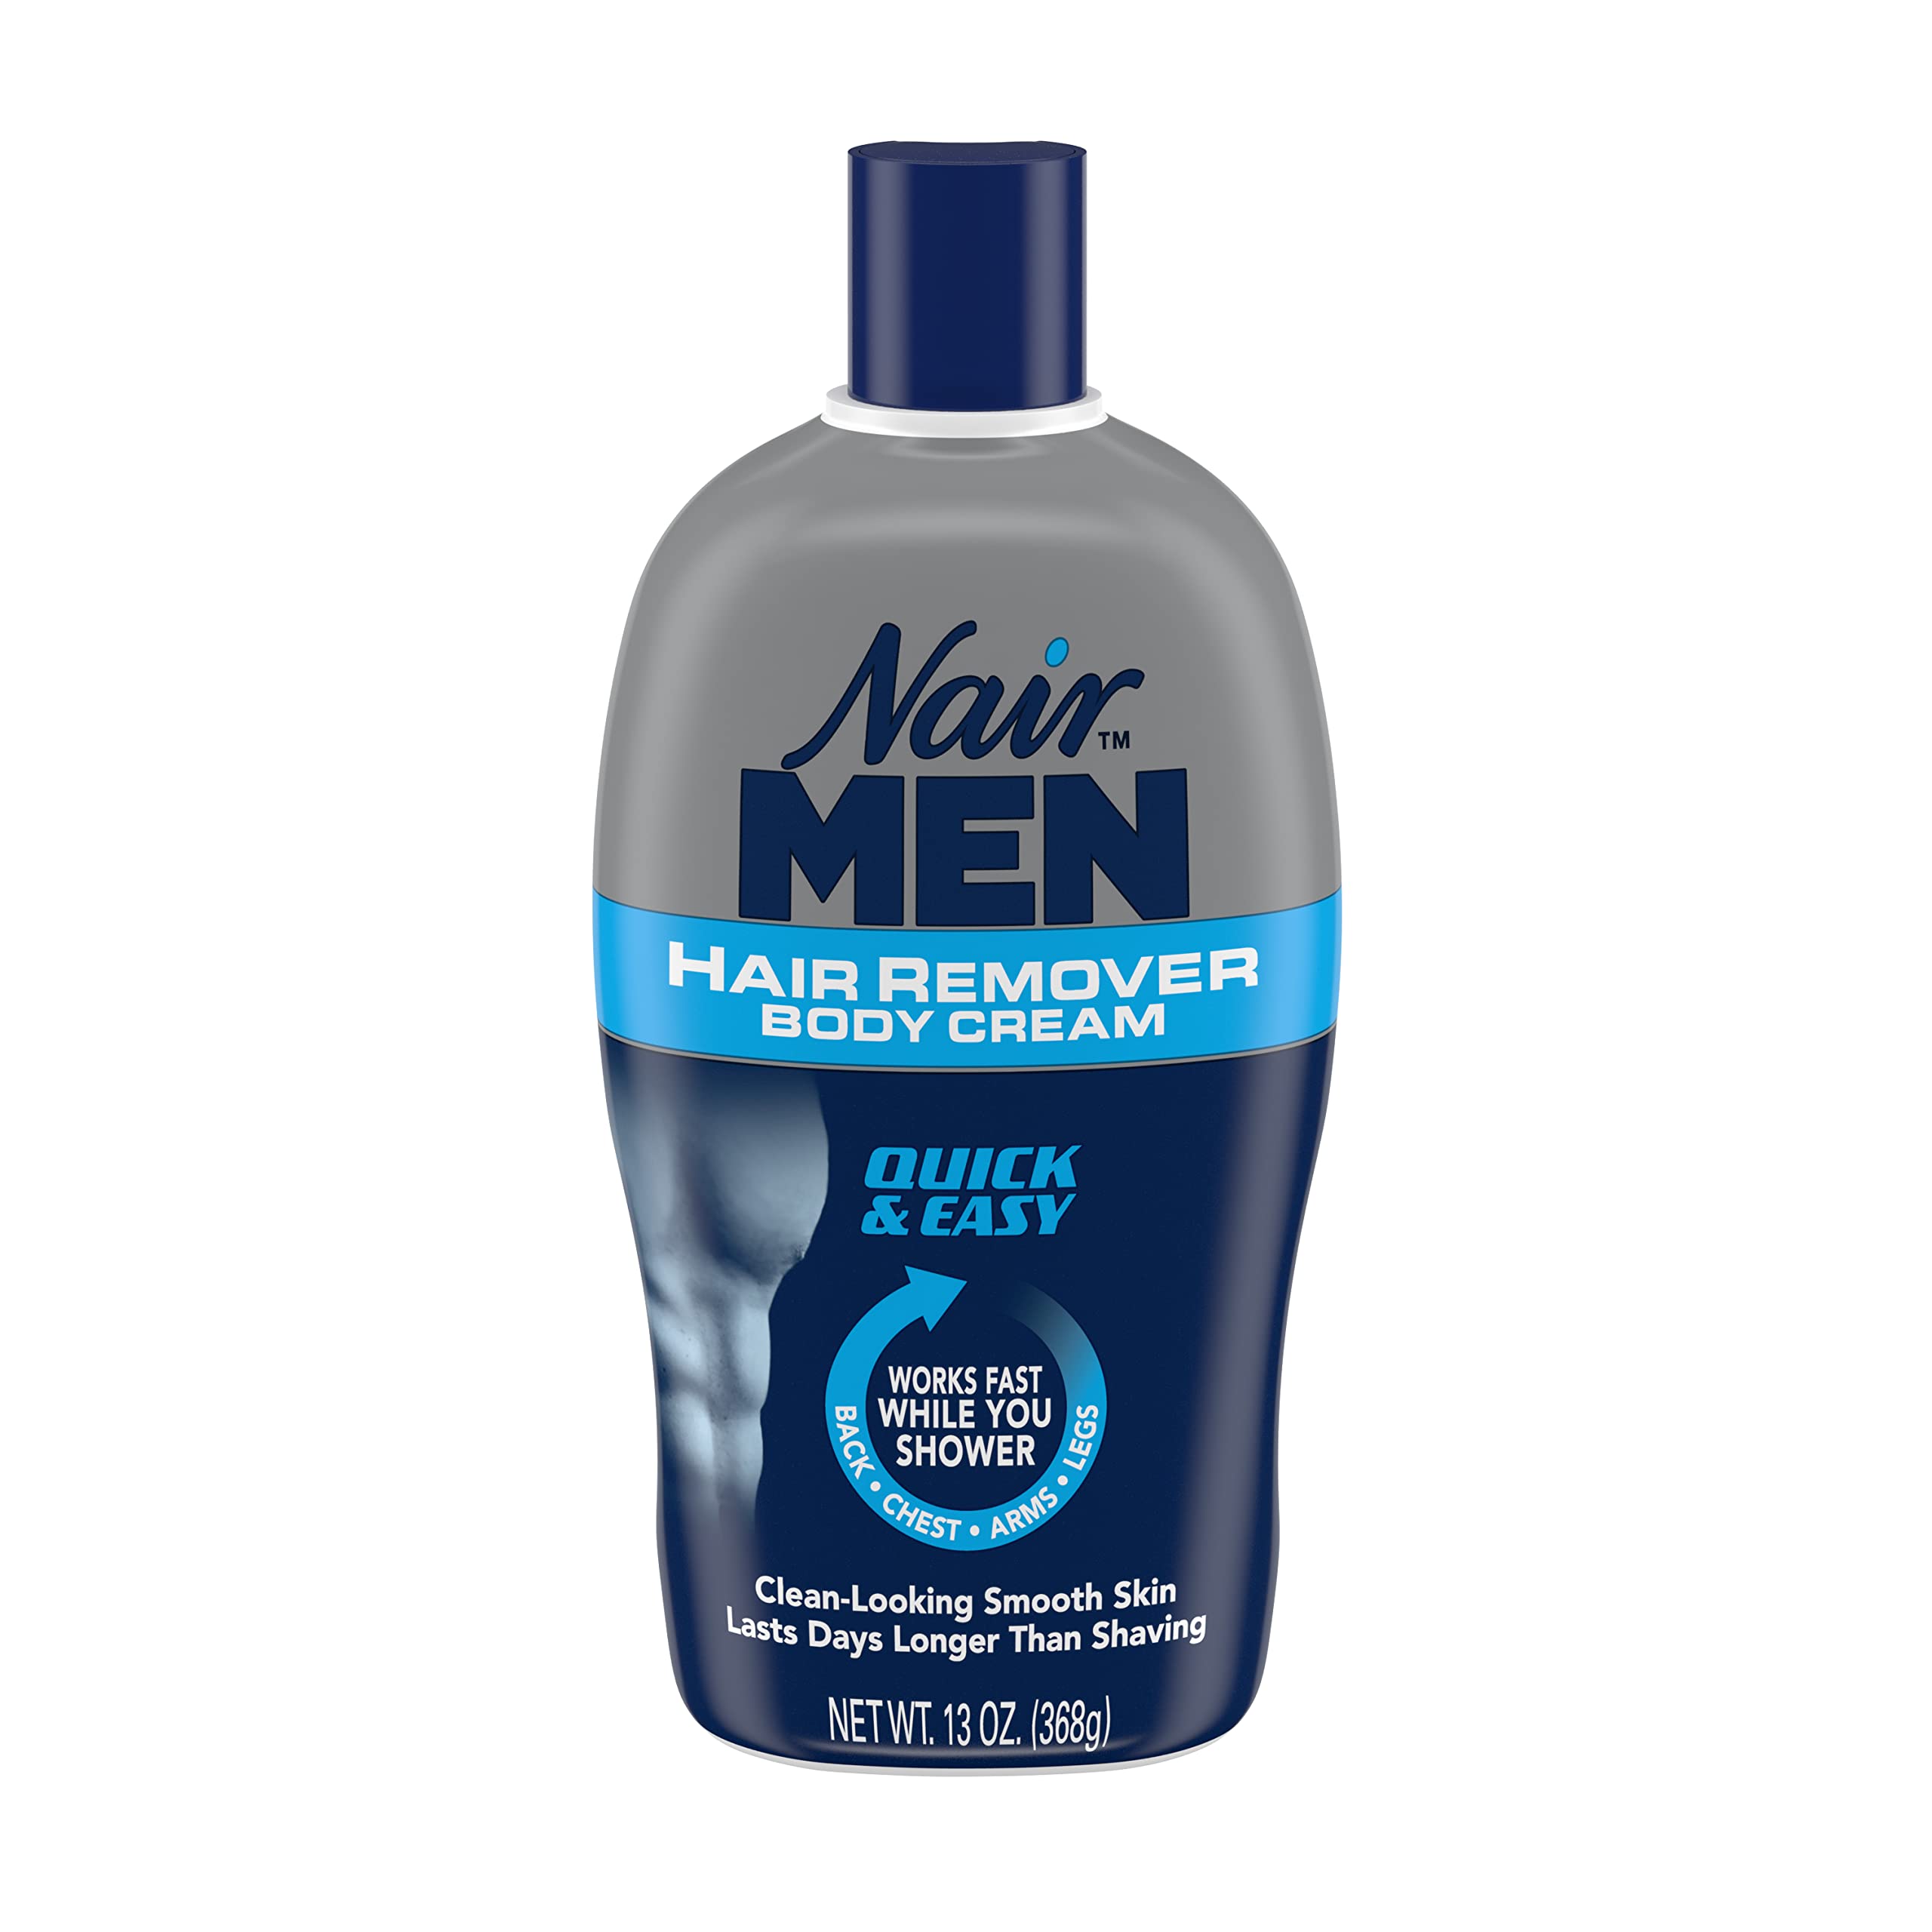 Nair For Men Hair Remover Body Cream Back Chest Arms and Legs 13 oz (368 g)